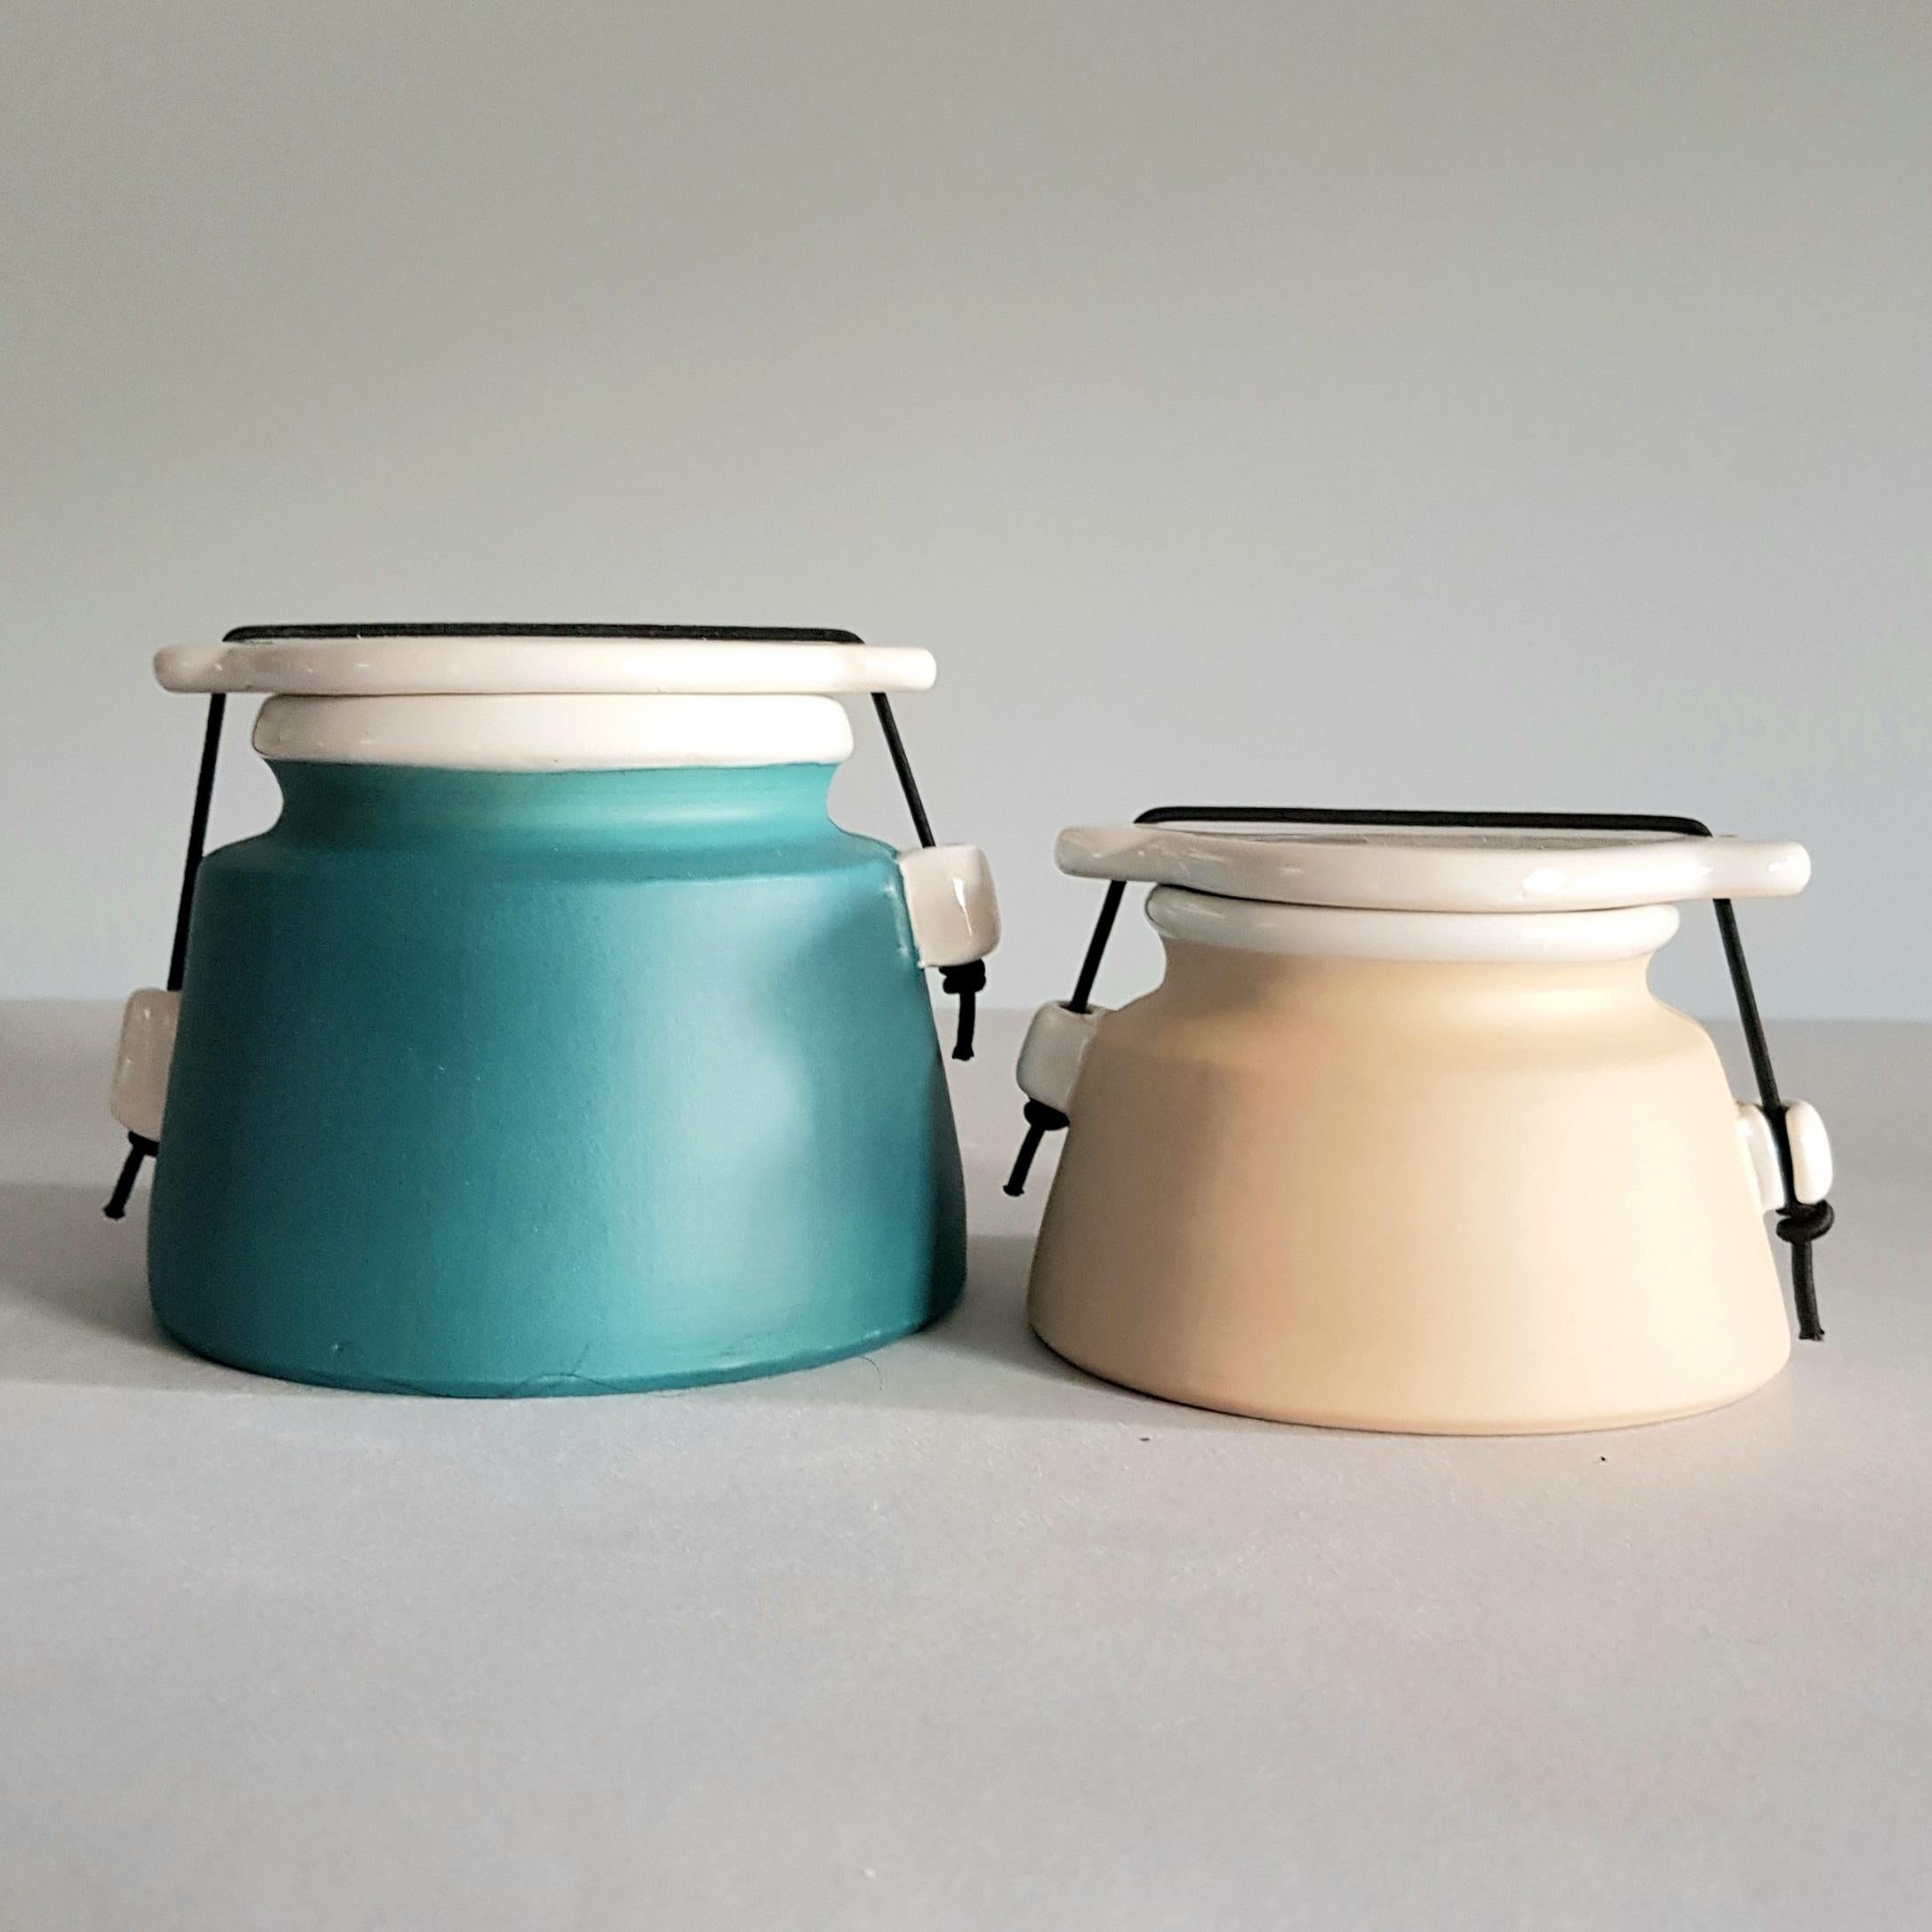 Contemporary Amélie Handcrafted Jars, Handmade in Italy 2021, Choose Size/Colours For Sale